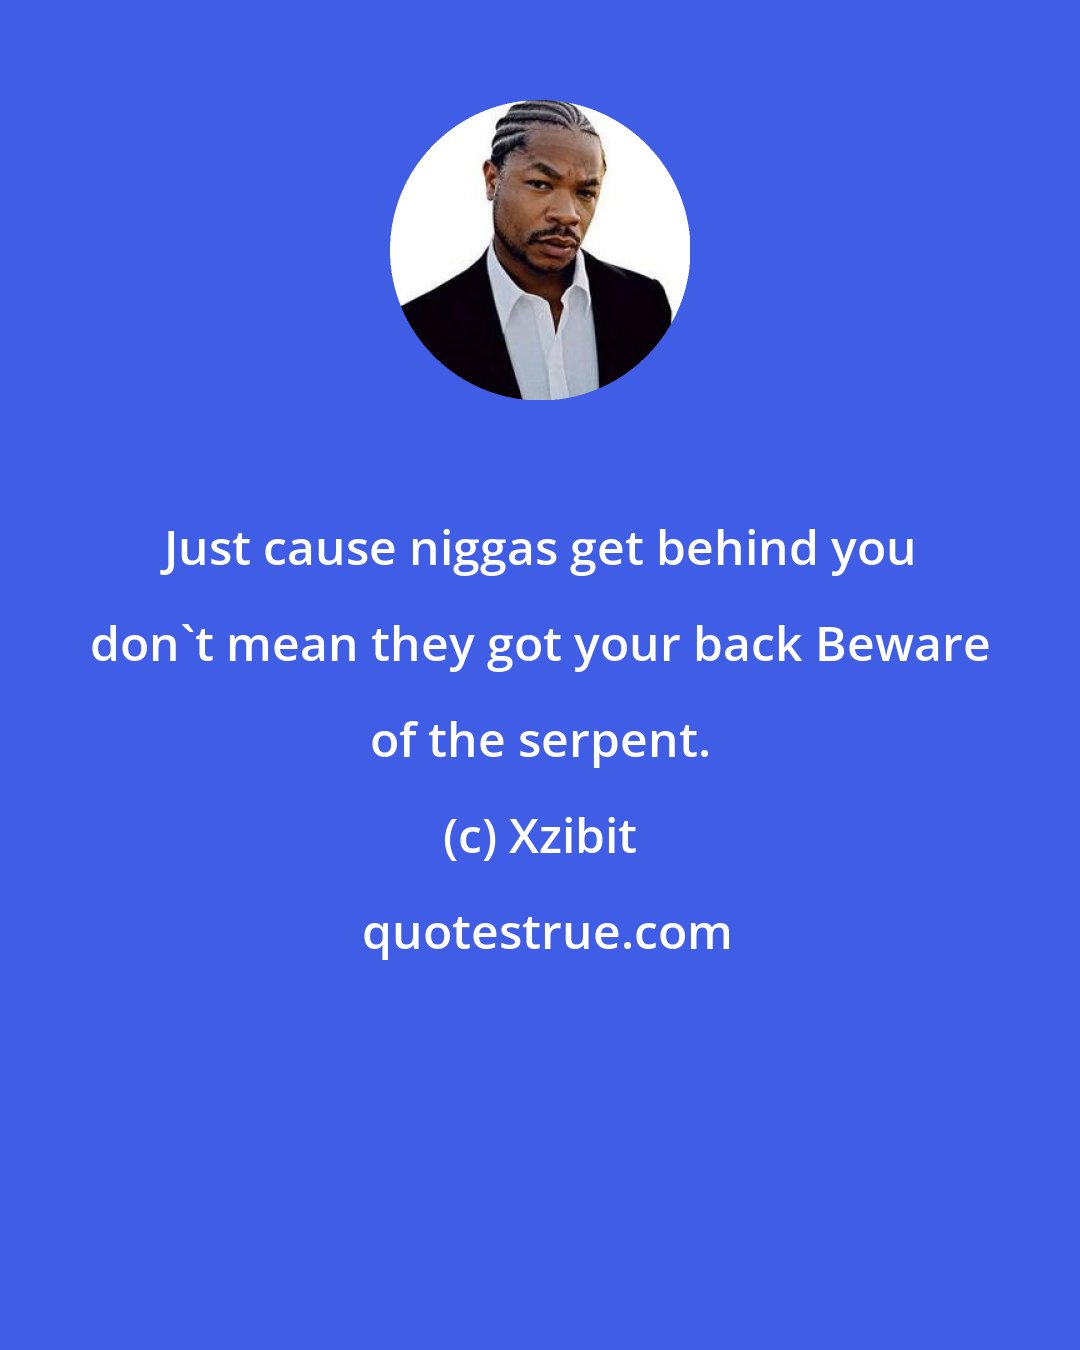 Xzibit: Just cause niggas get behind you don't mean they got your back Beware of the serpent.